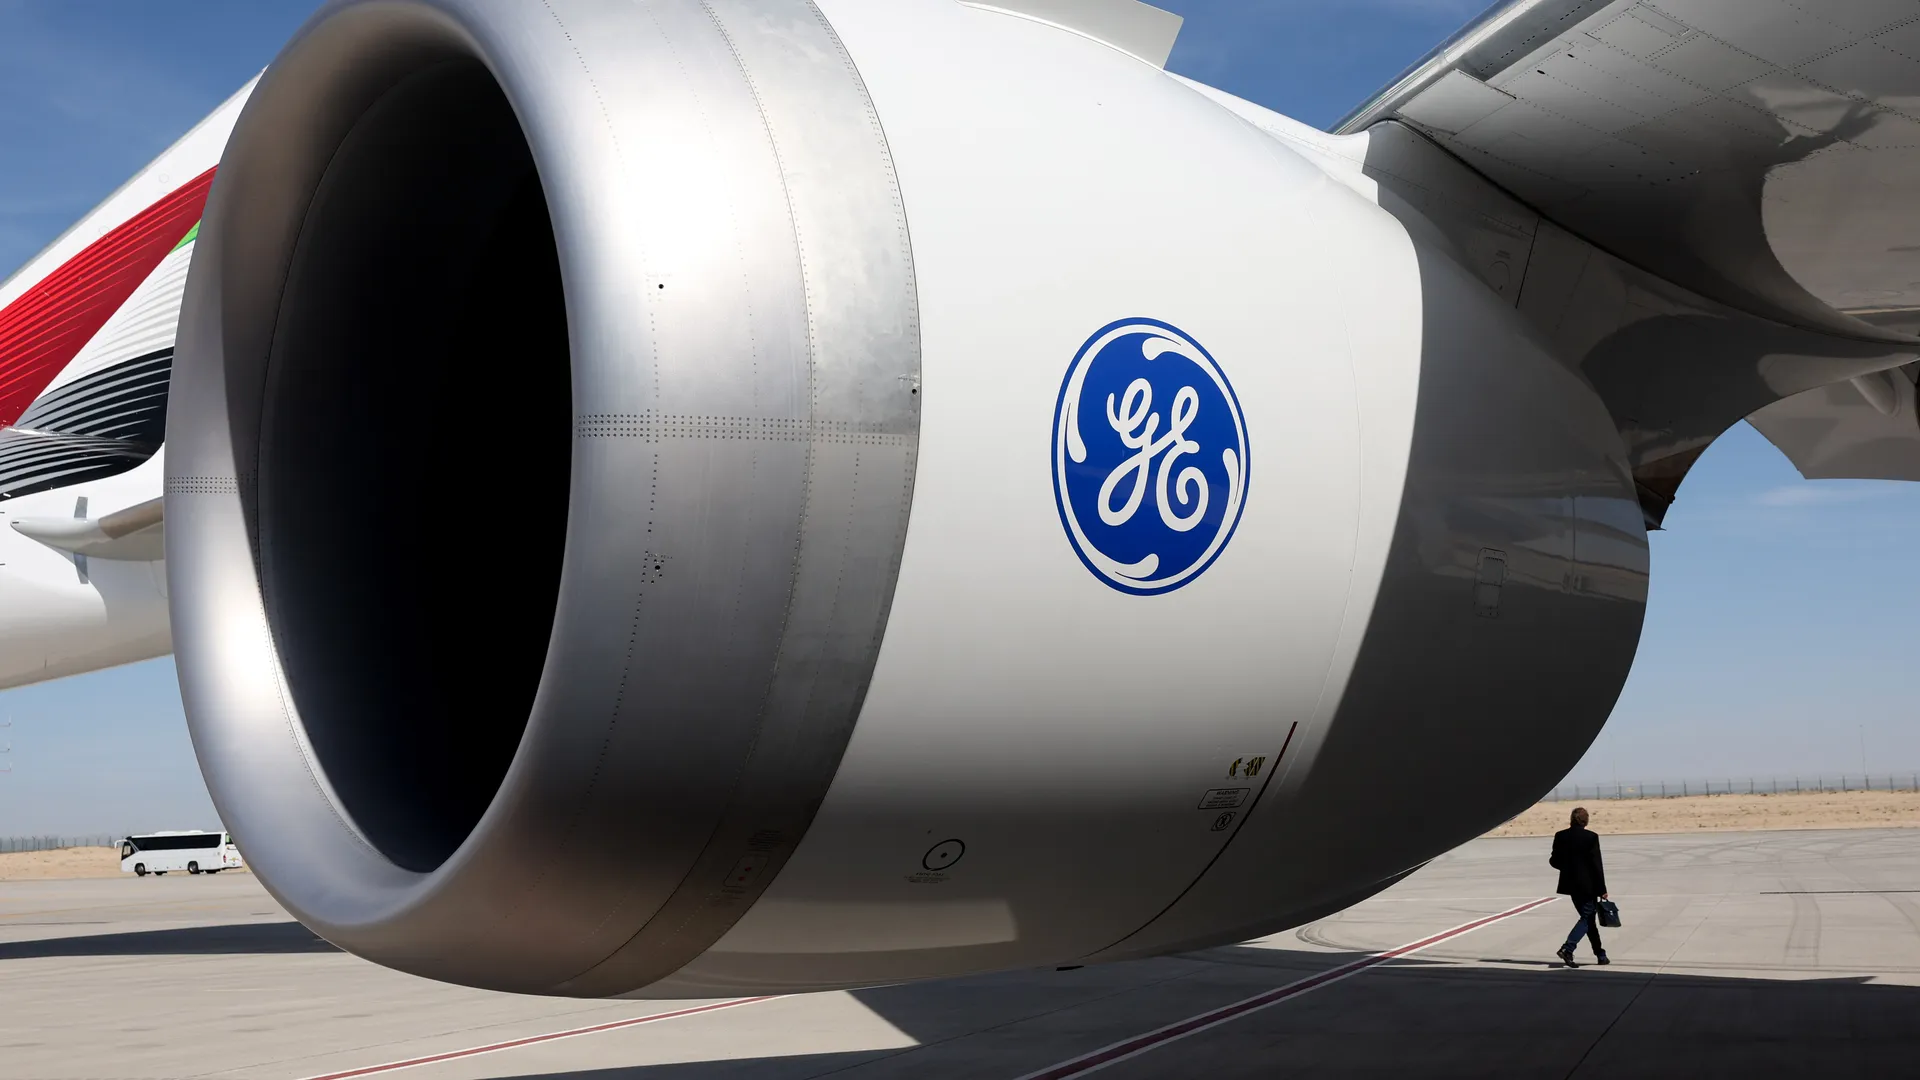 GE Aerospace Chief Commercial Officer John Slattery to Transition to Advisory Role in June